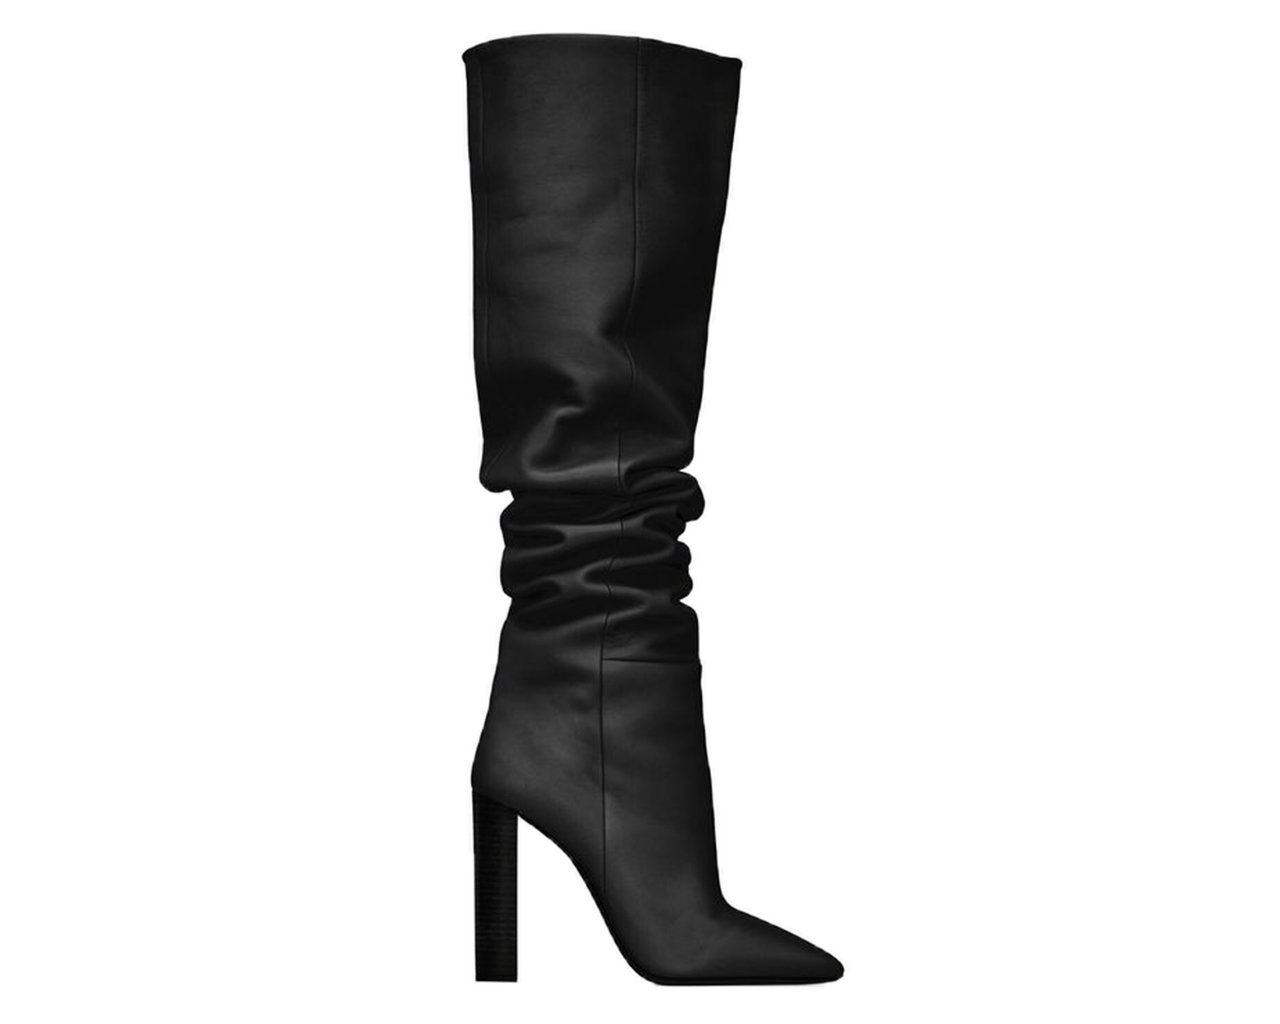 YSL 76 Over-the-Knee Boots